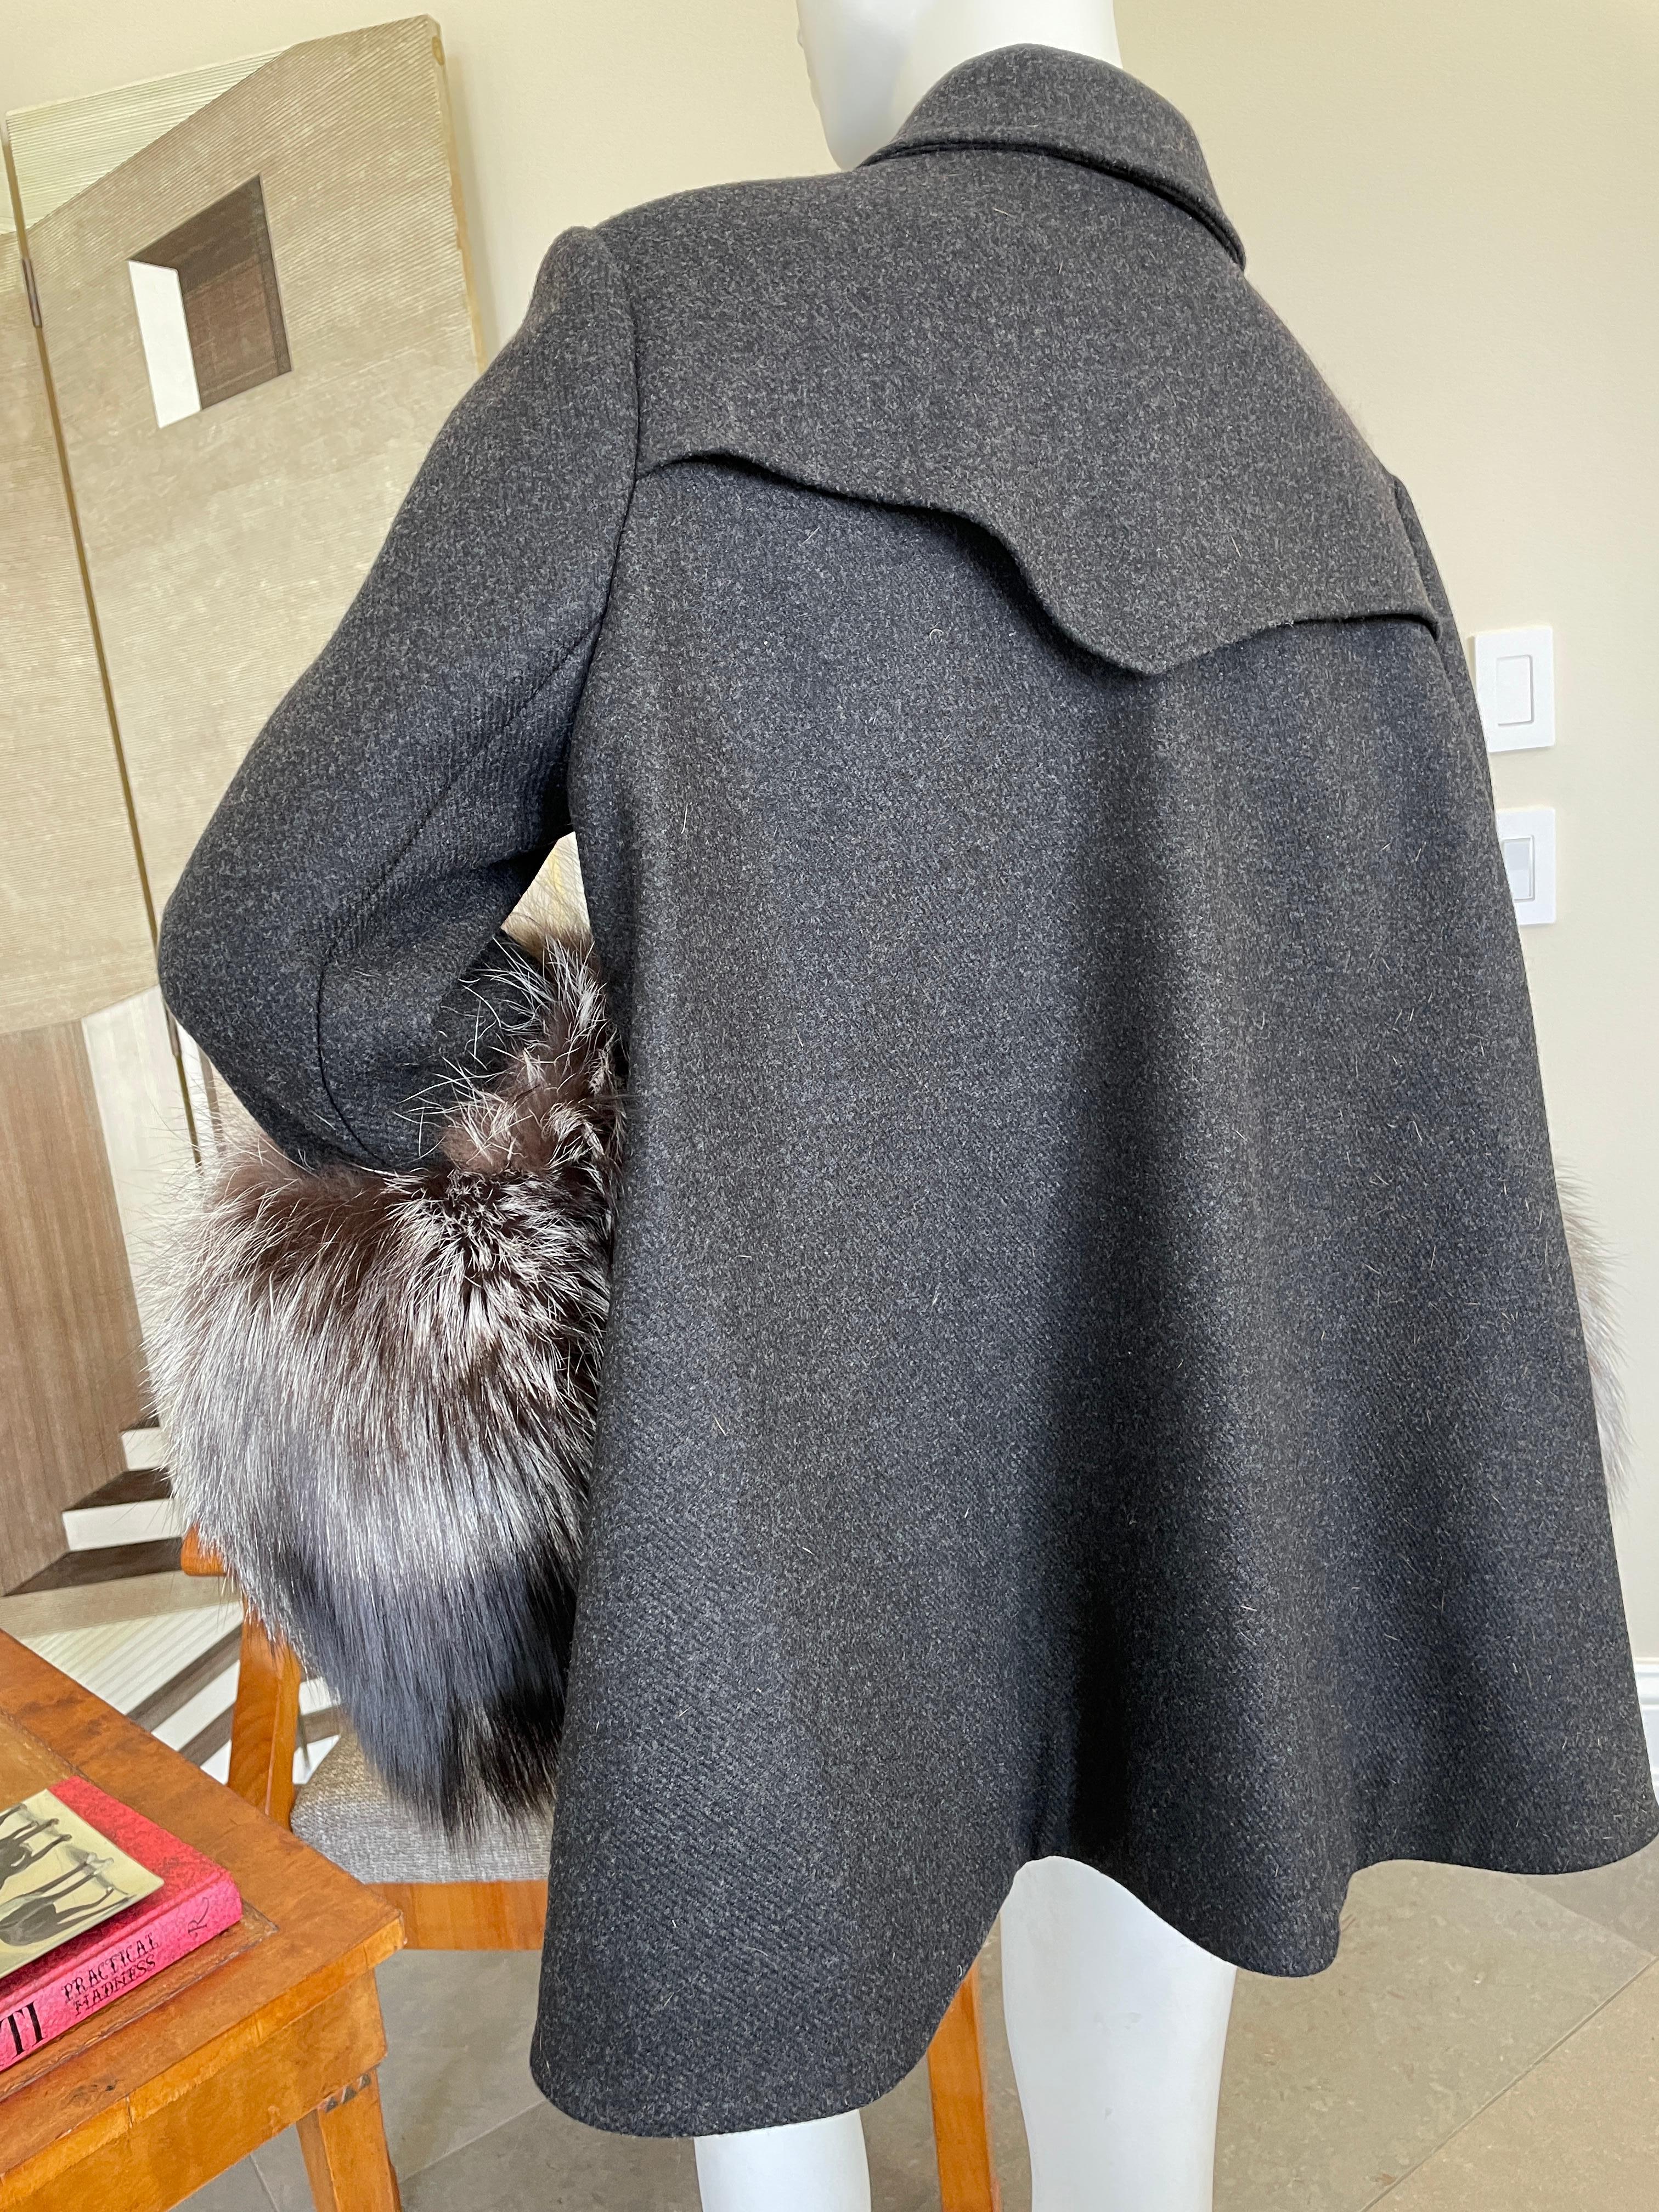 Christian Dior by Gianfranco Ferre Gray Peacoat with Fox Fur Cuffs For Sale 2